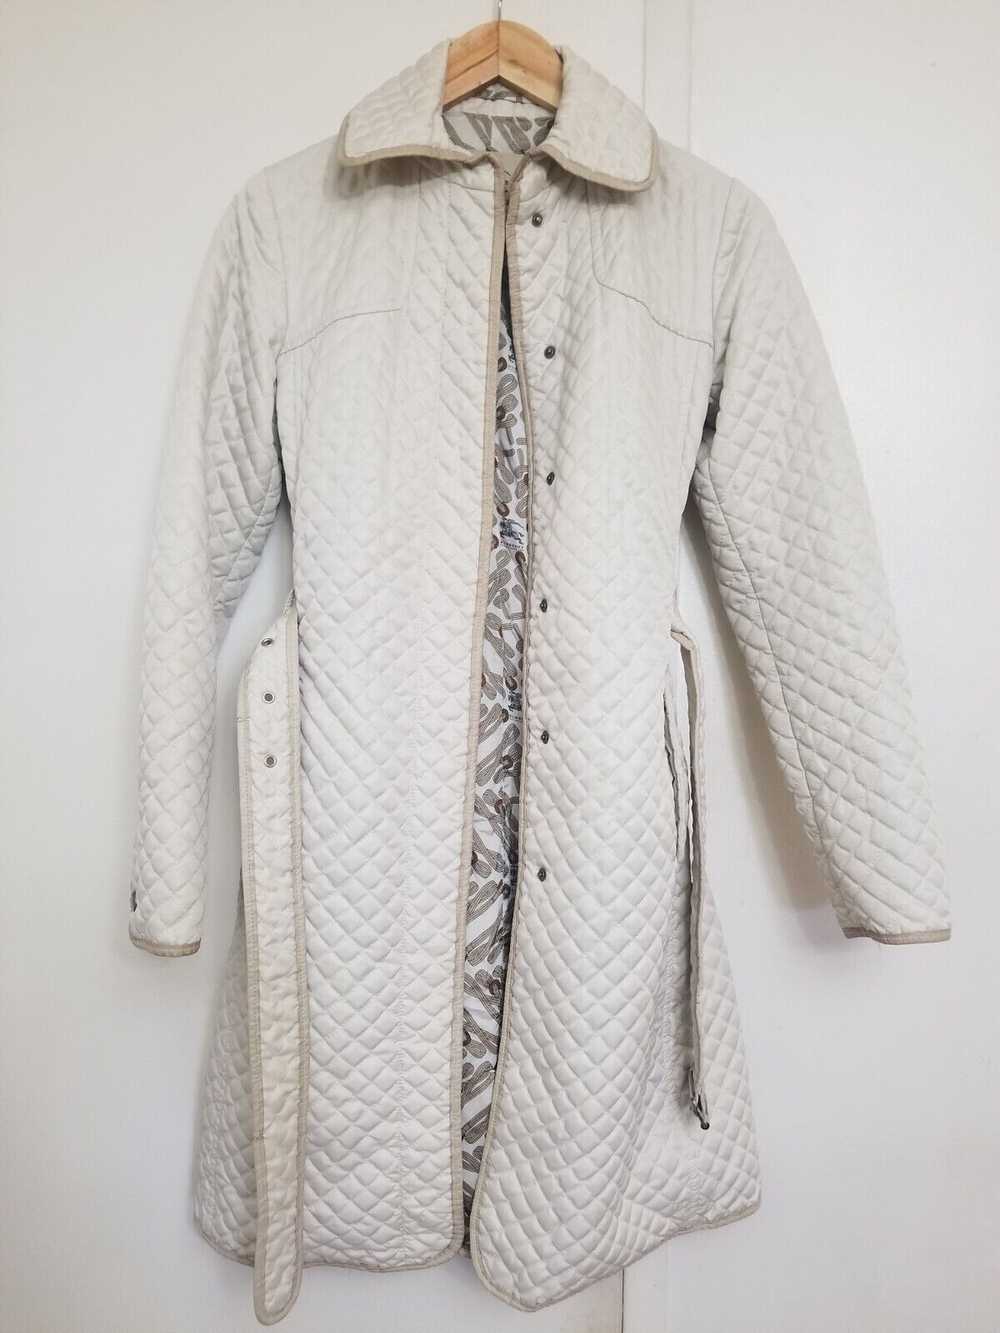 Burberry BURBERRY LONDON QUILTED IVORY JACKET - image 4